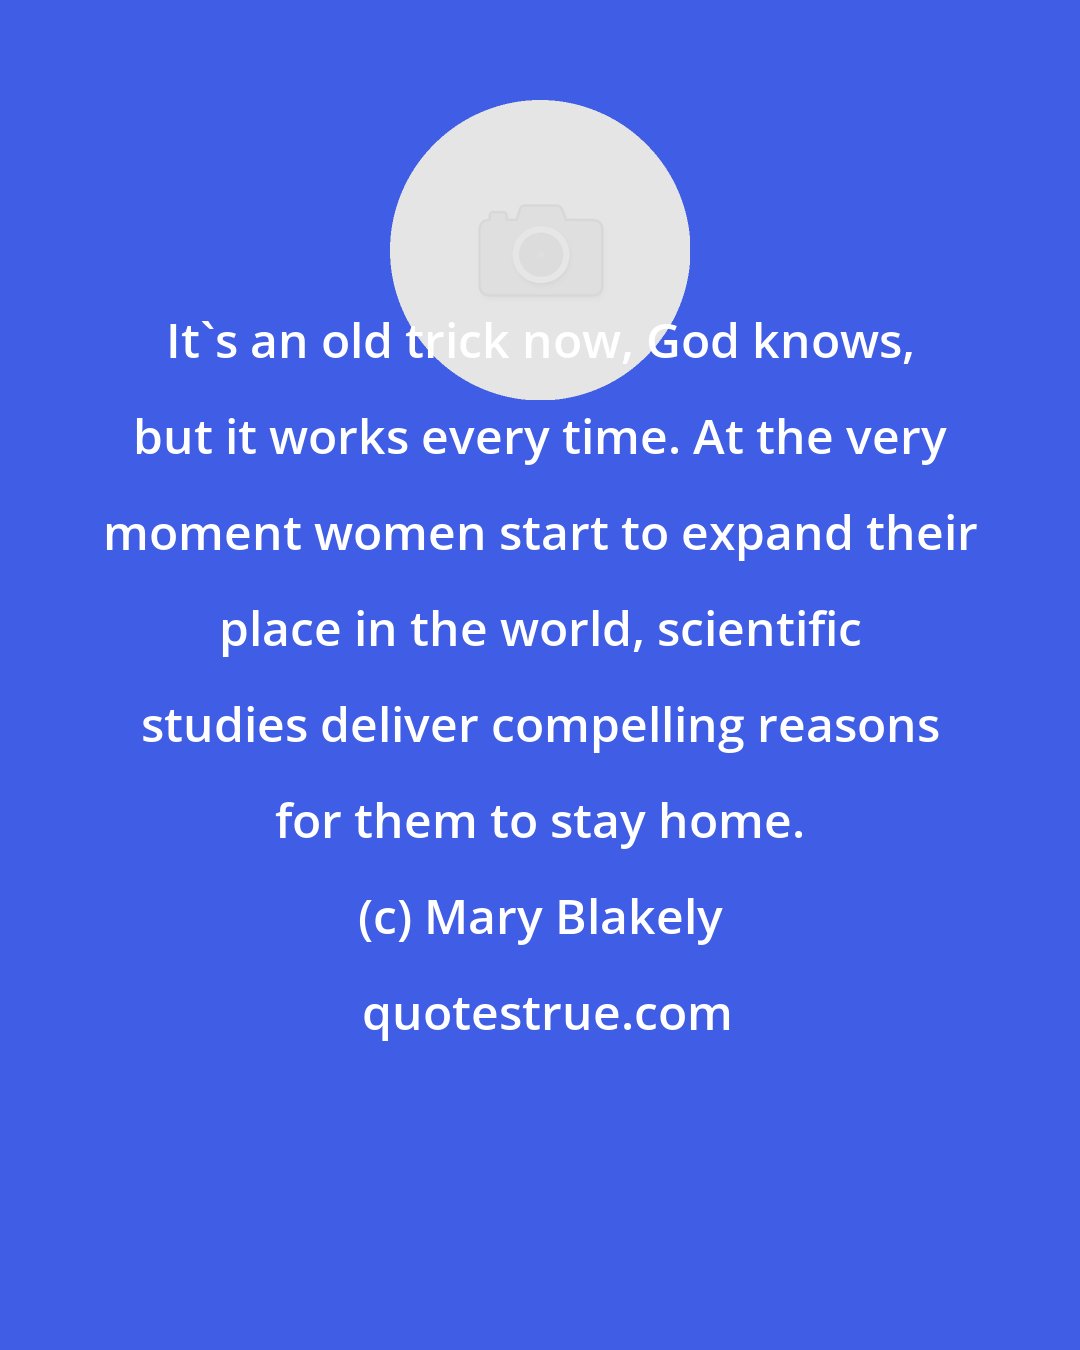 Mary Blakely: It's an old trick now, God knows, but it works every time. At the very moment women start to expand their place in the world, scientific studies deliver compelling reasons for them to stay home.